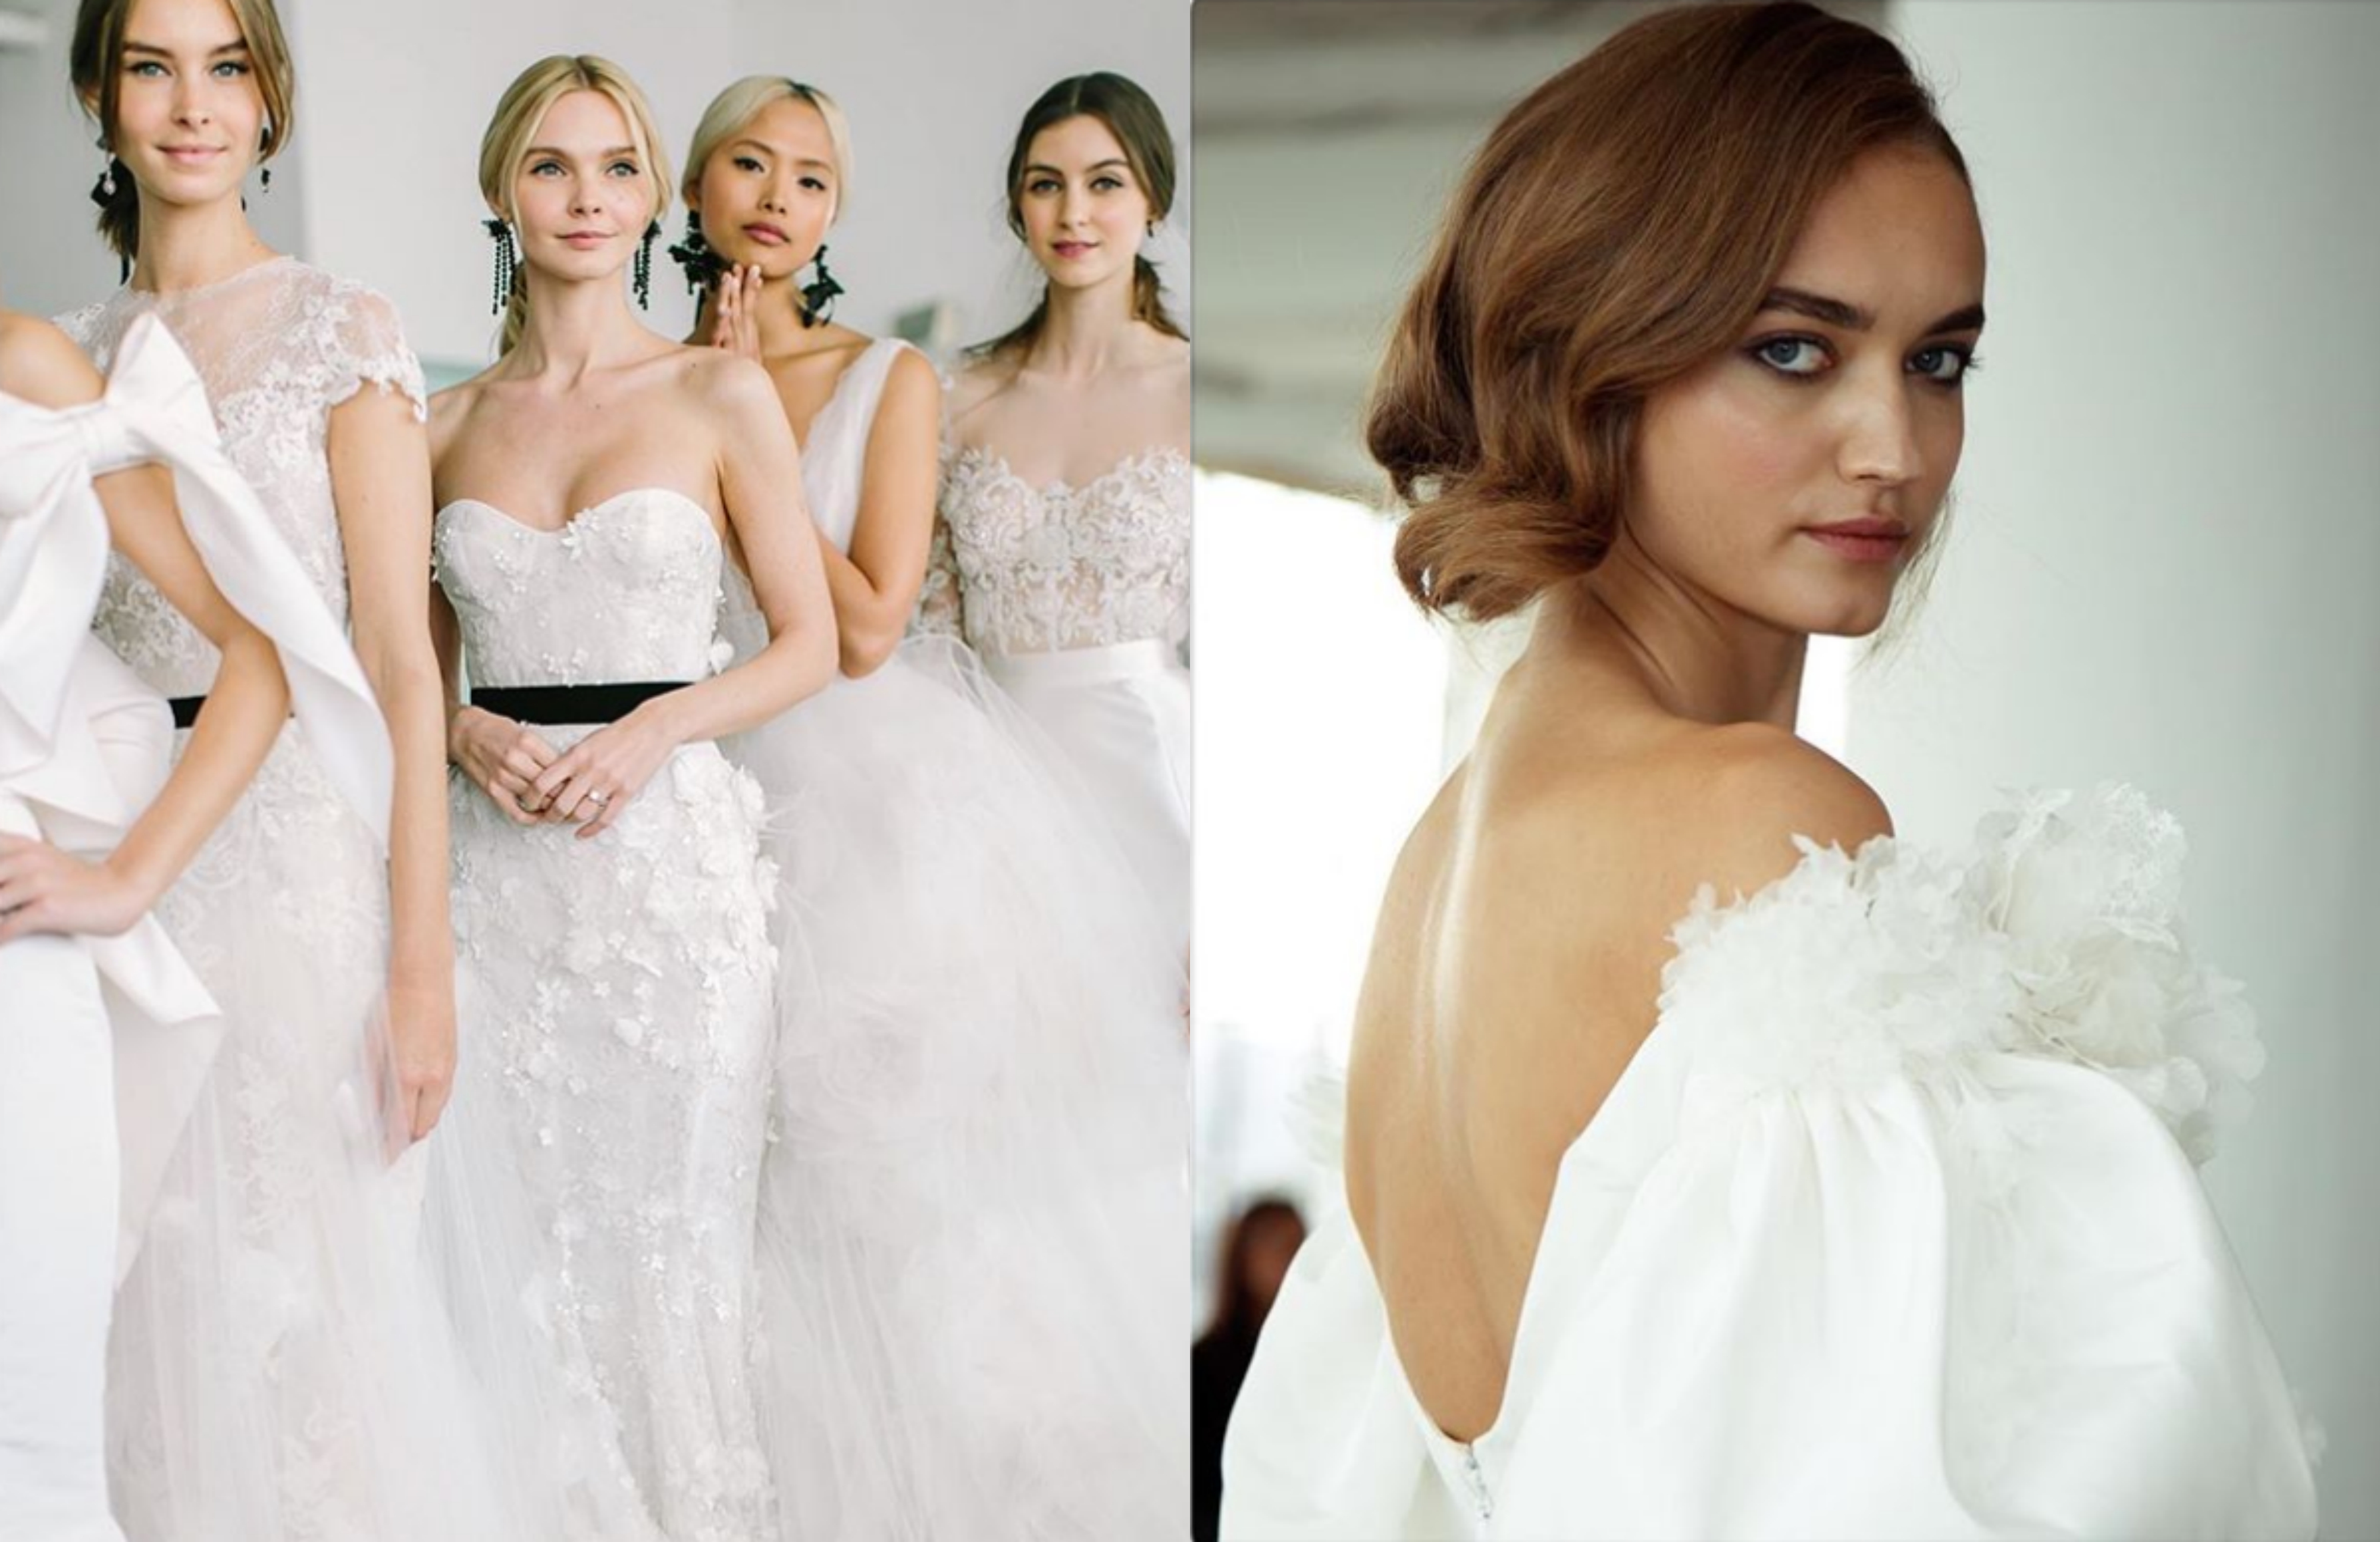 How to style your hair to match your wedding dress neckline